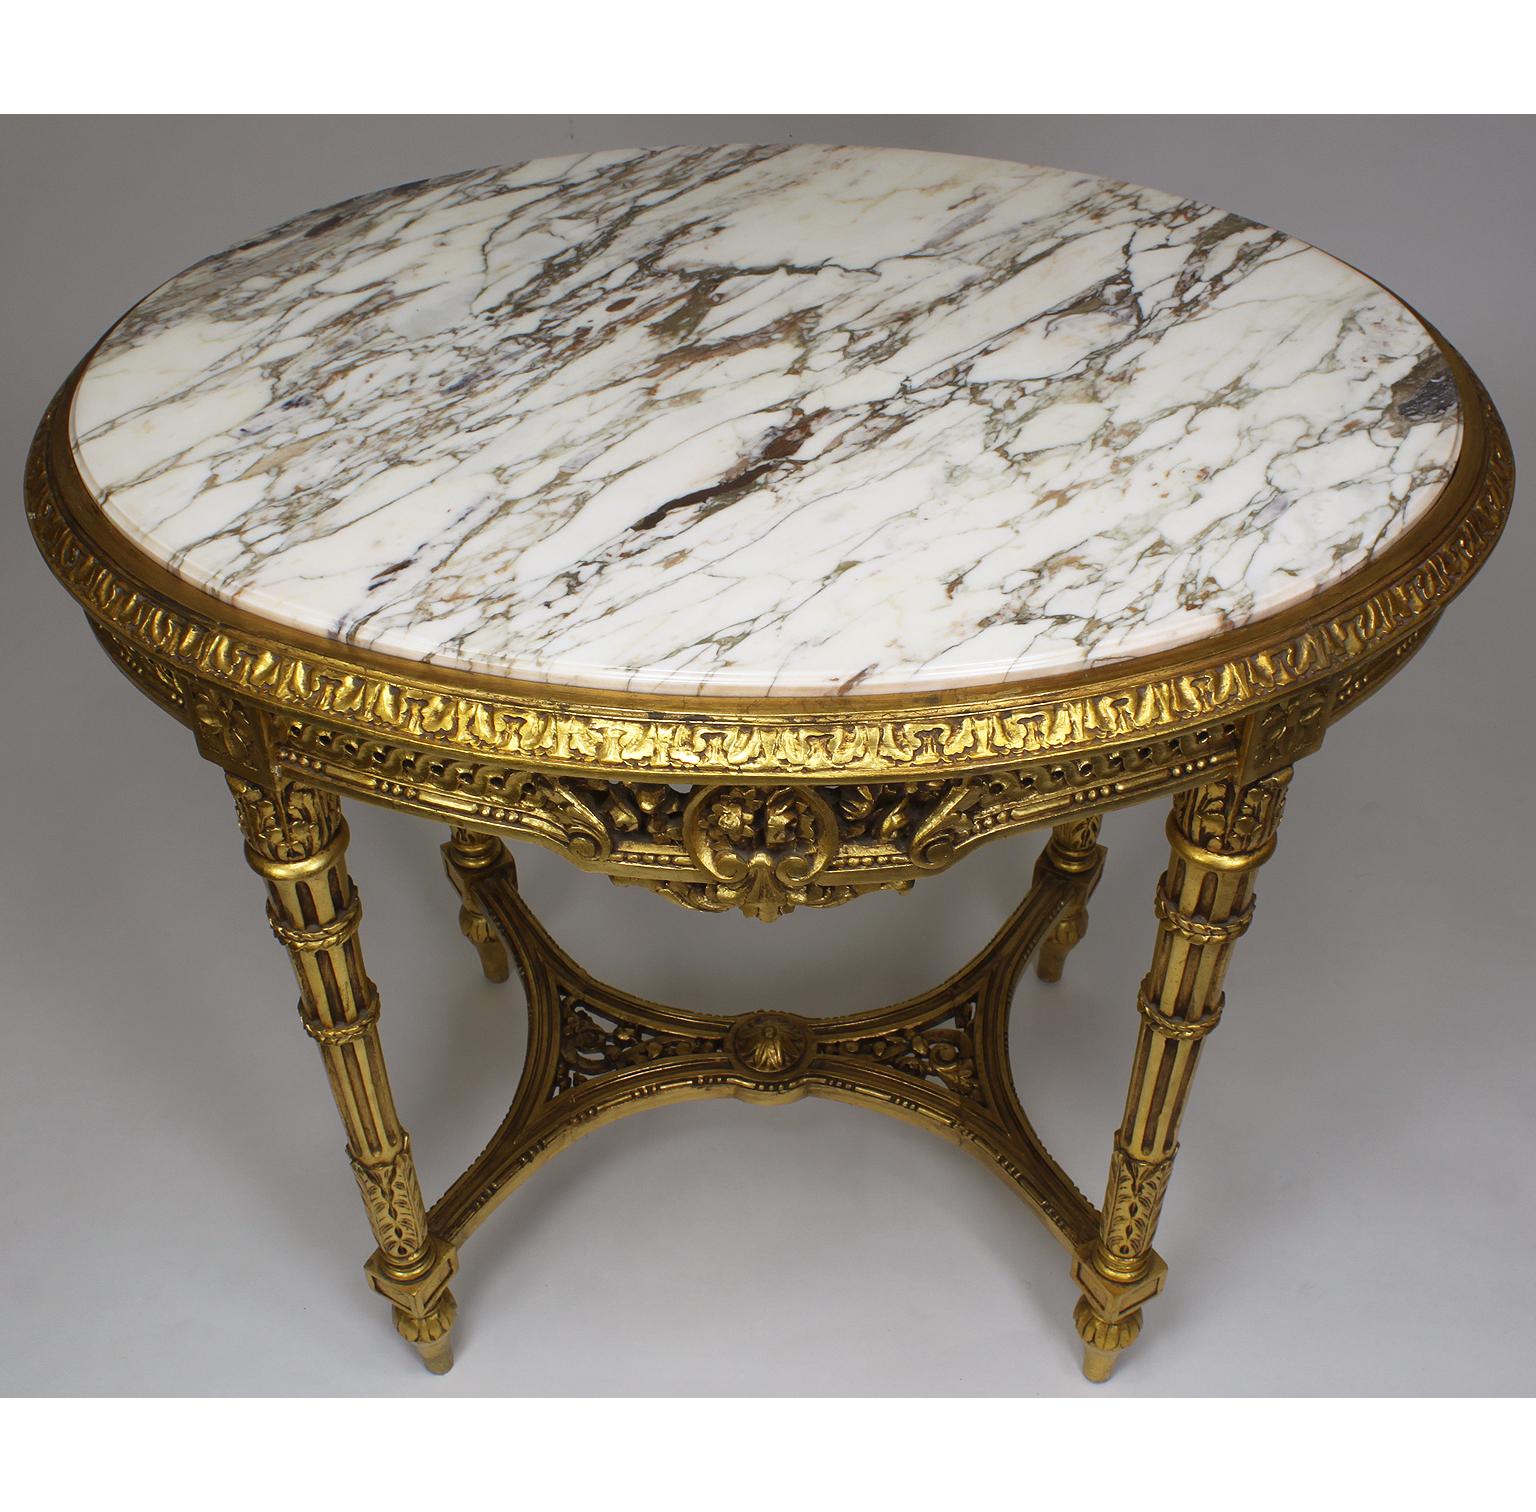 20th Century French Louis XVI Style Belle Époque Oval Giltwood Carved Marble-Top Center Table For Sale